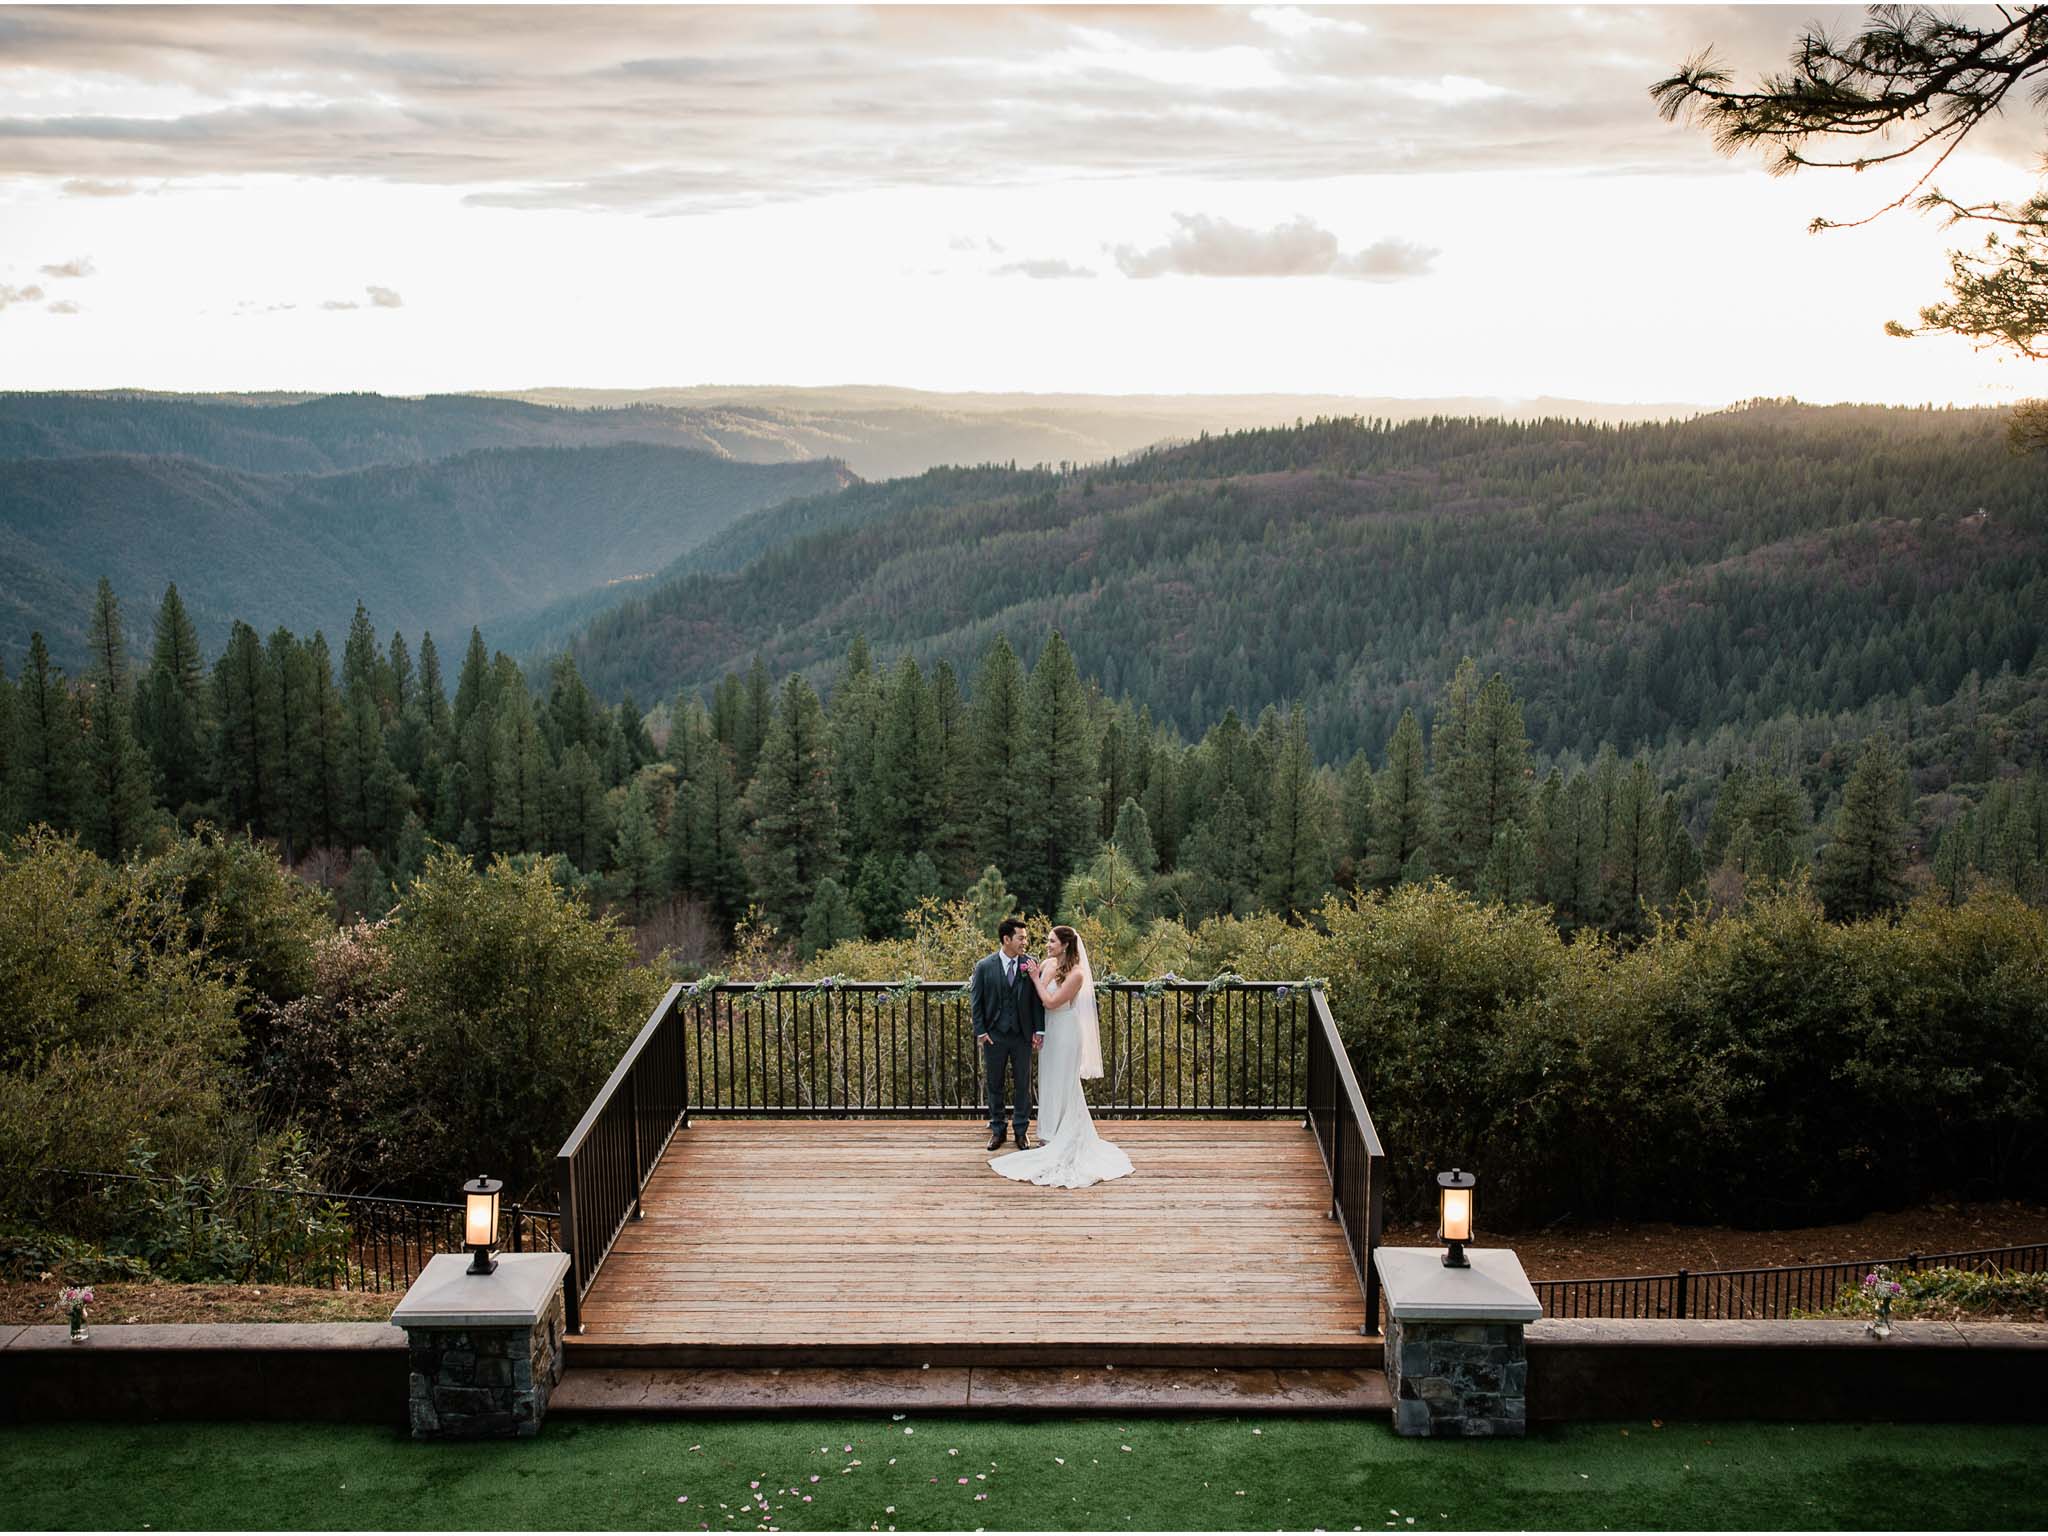 A bride and groom at a mountain wedding venue.